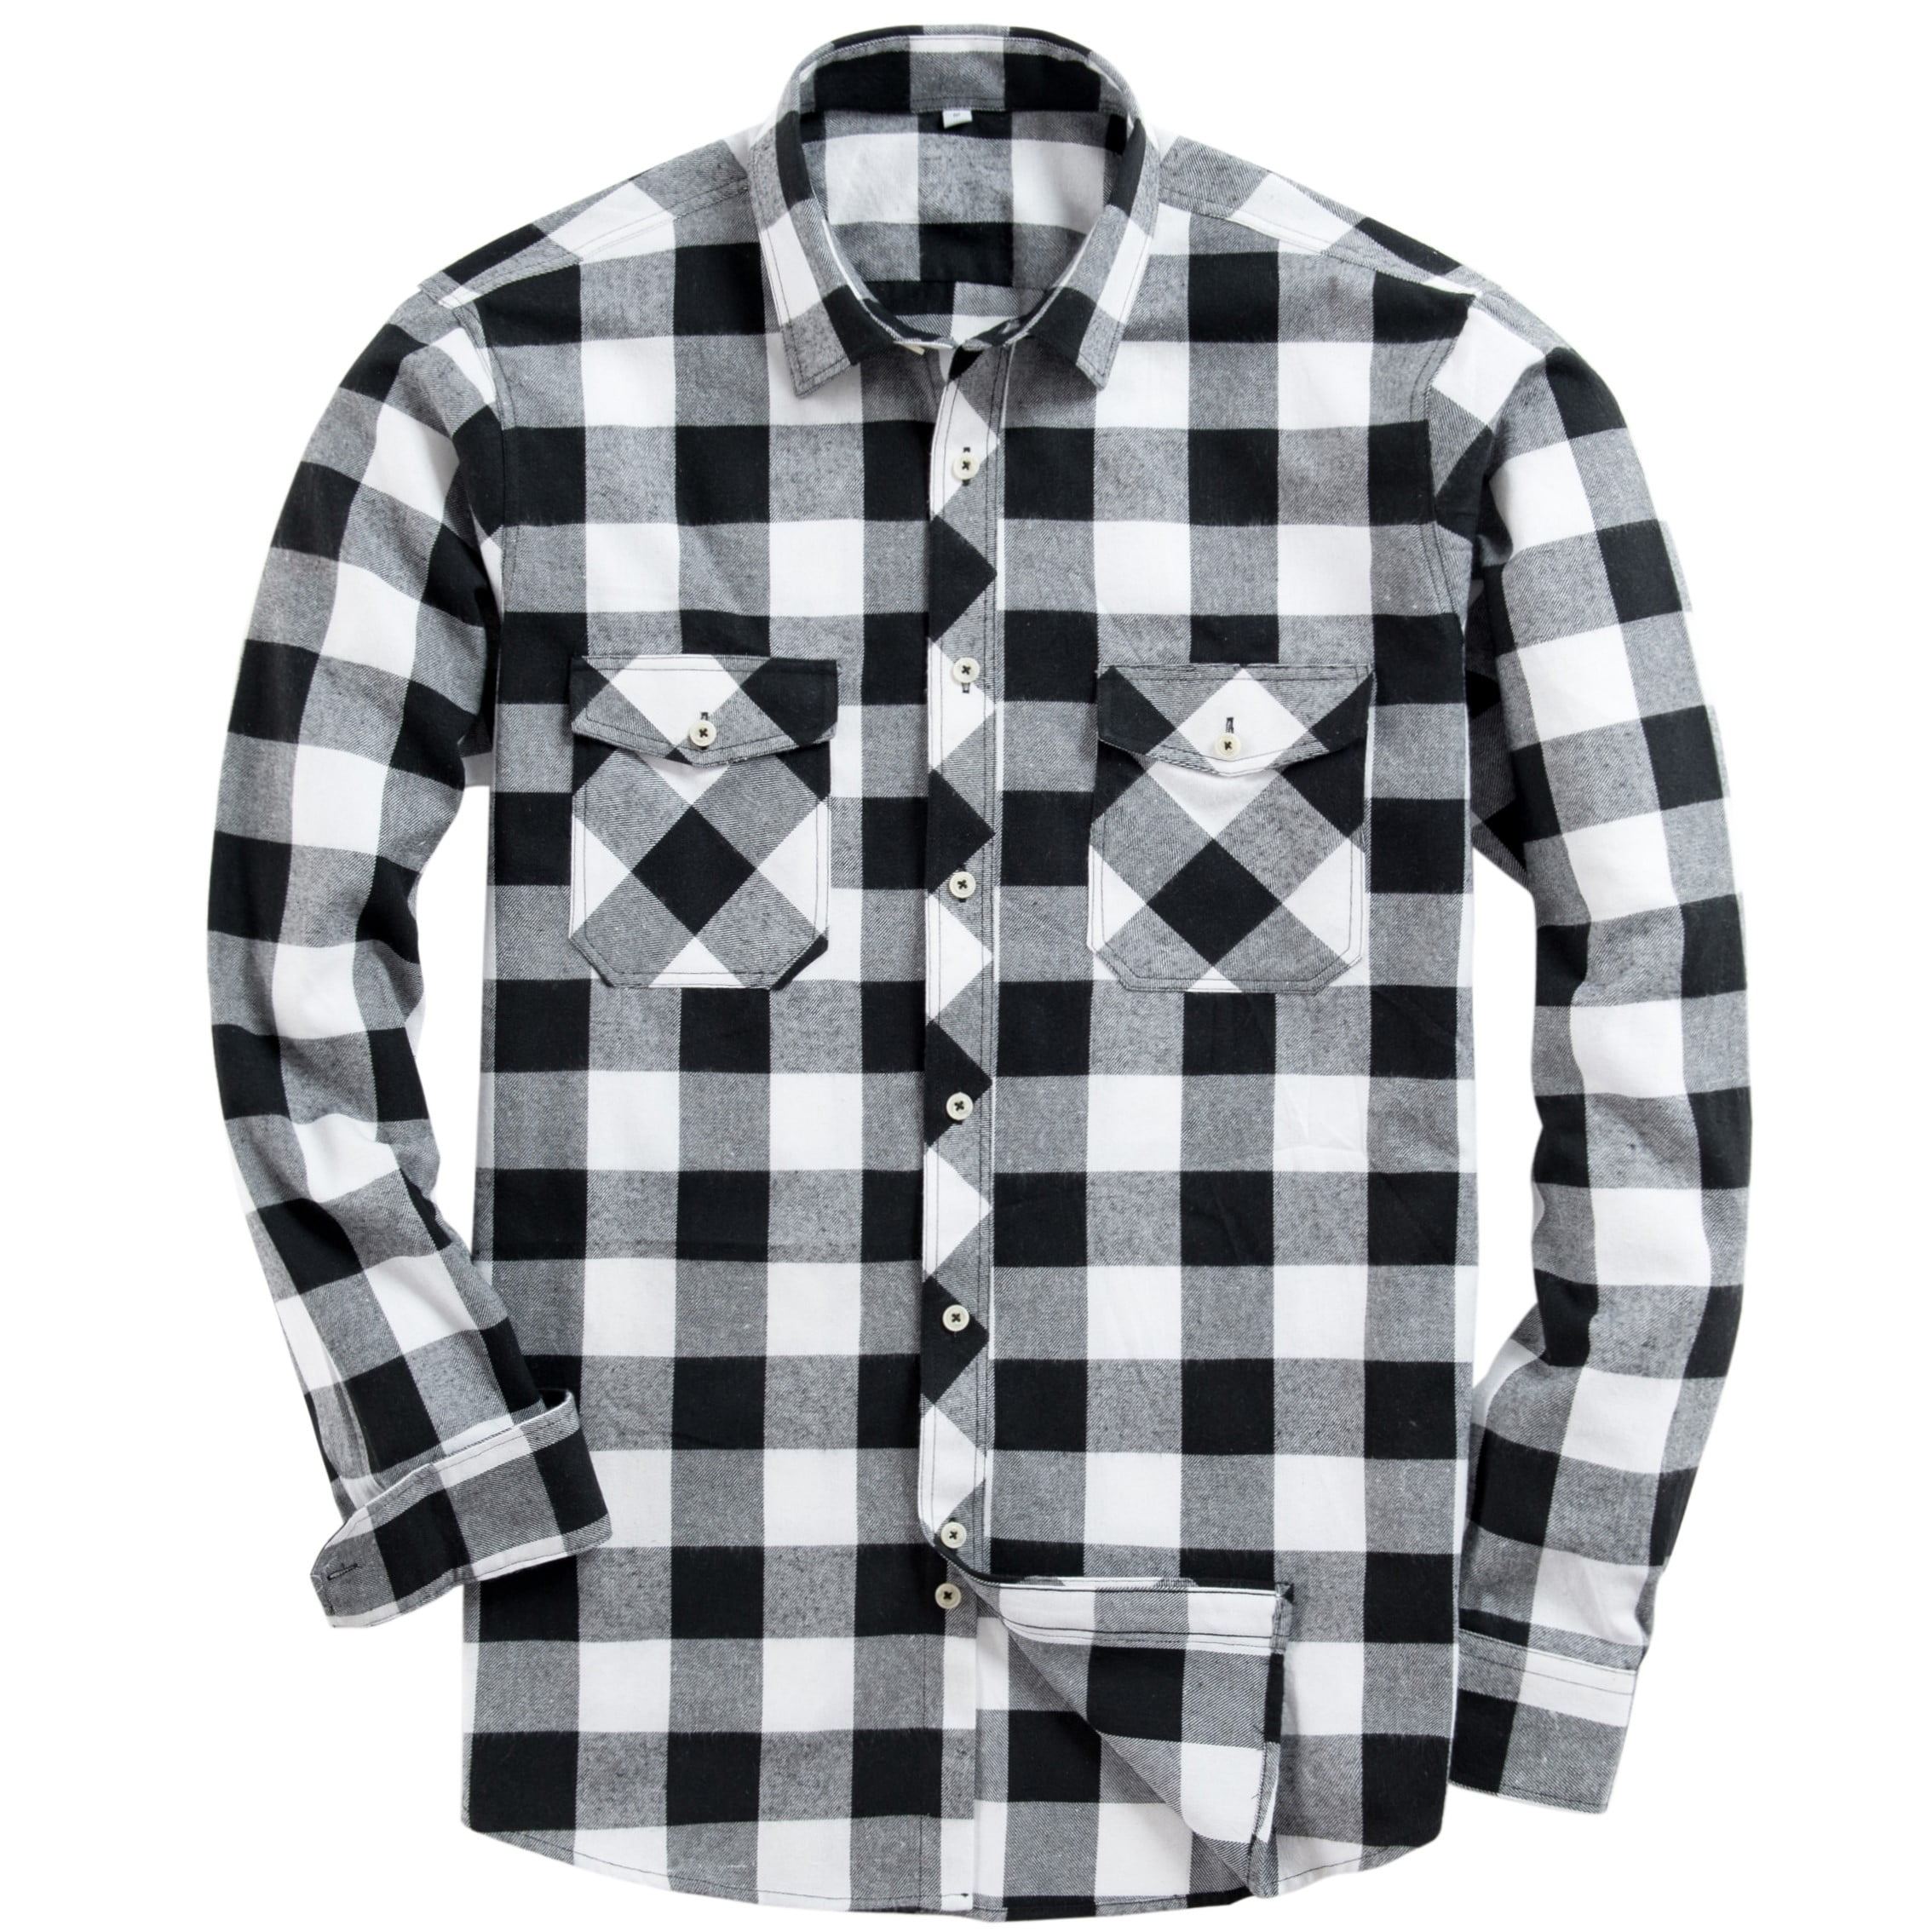 Alimens & Gentle Long Sleeve Flannel Shirts For Men Big And Tall Plaid ...